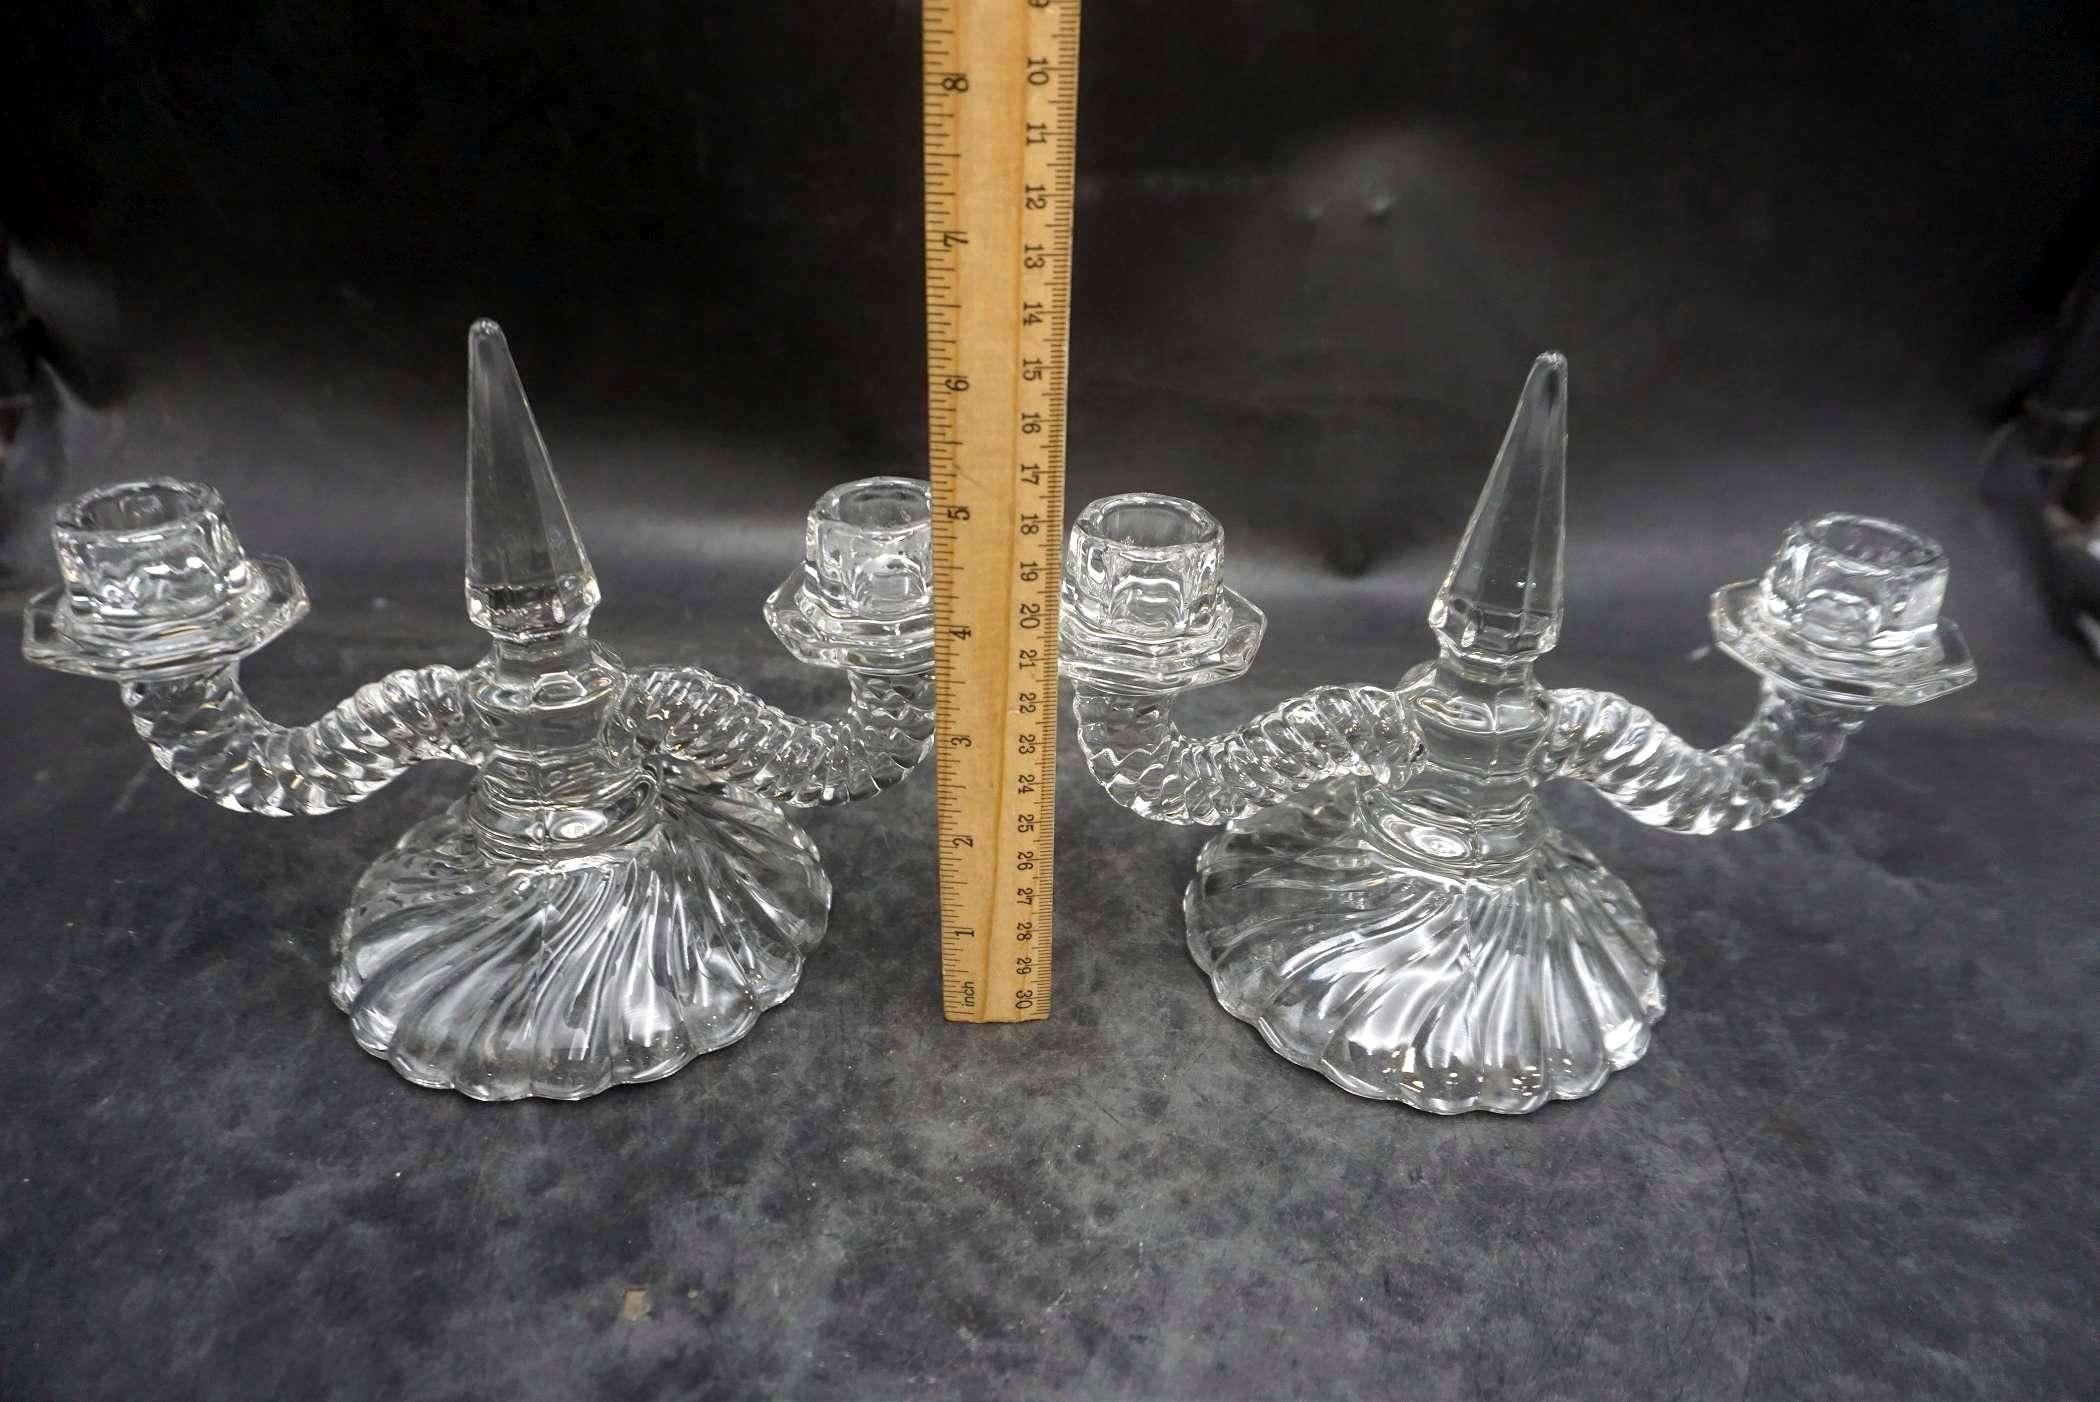 2 - Glass Candlestick Holders